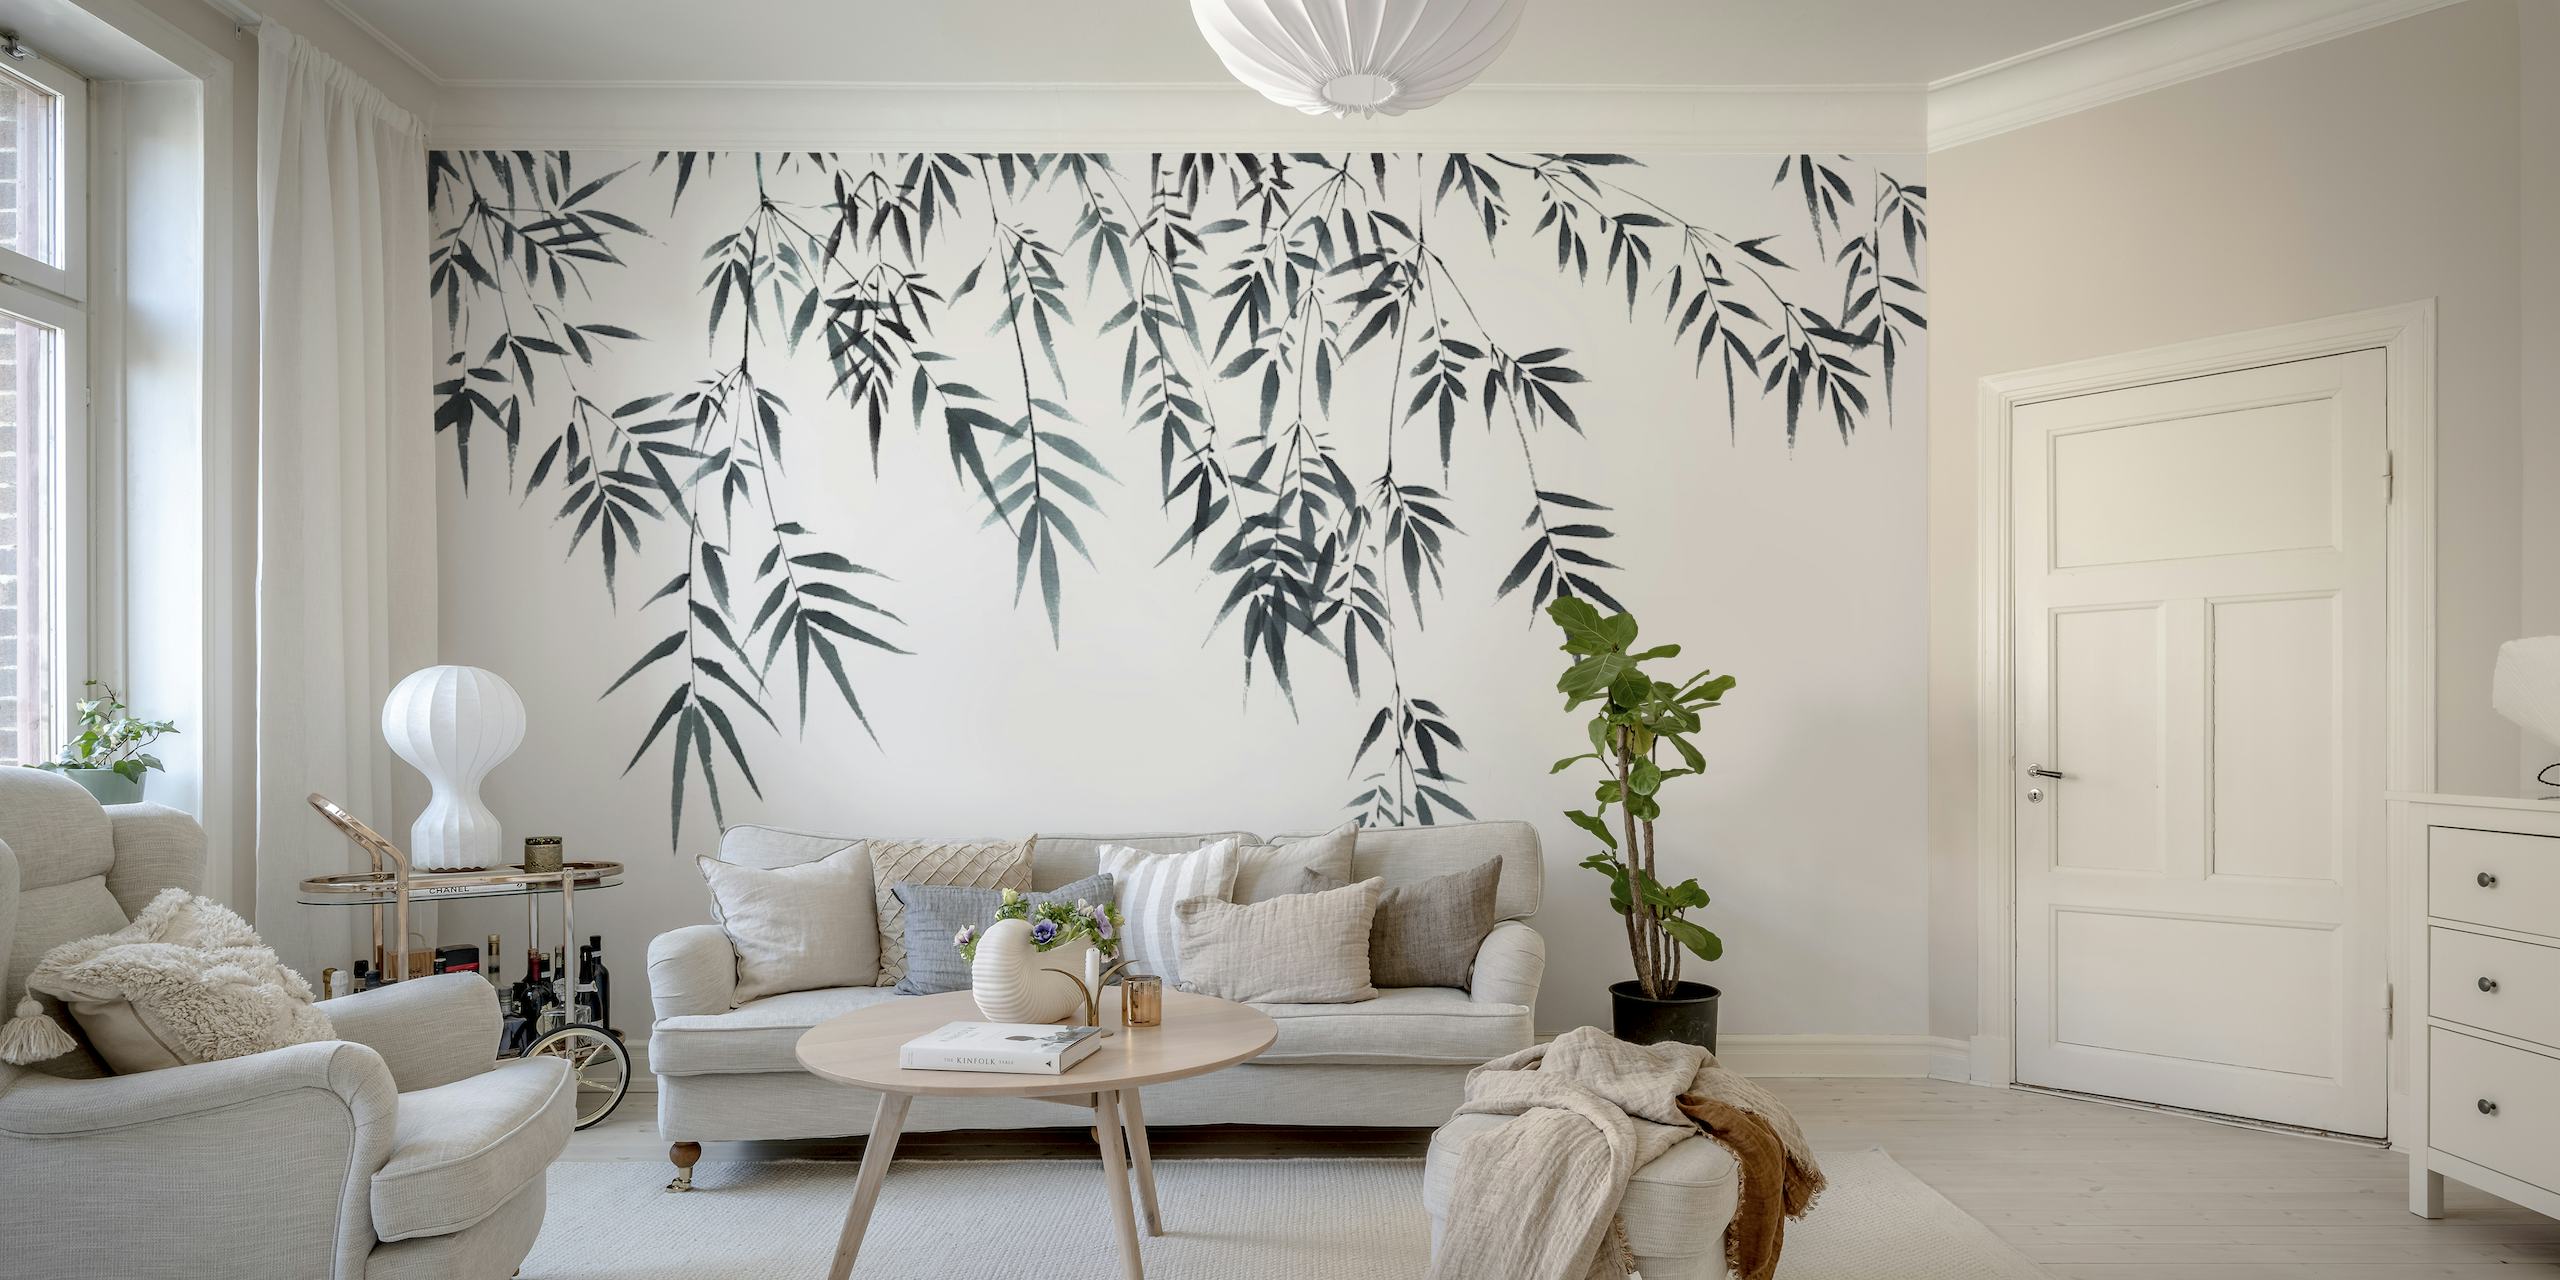 Chinese ink bamboo leaves behang